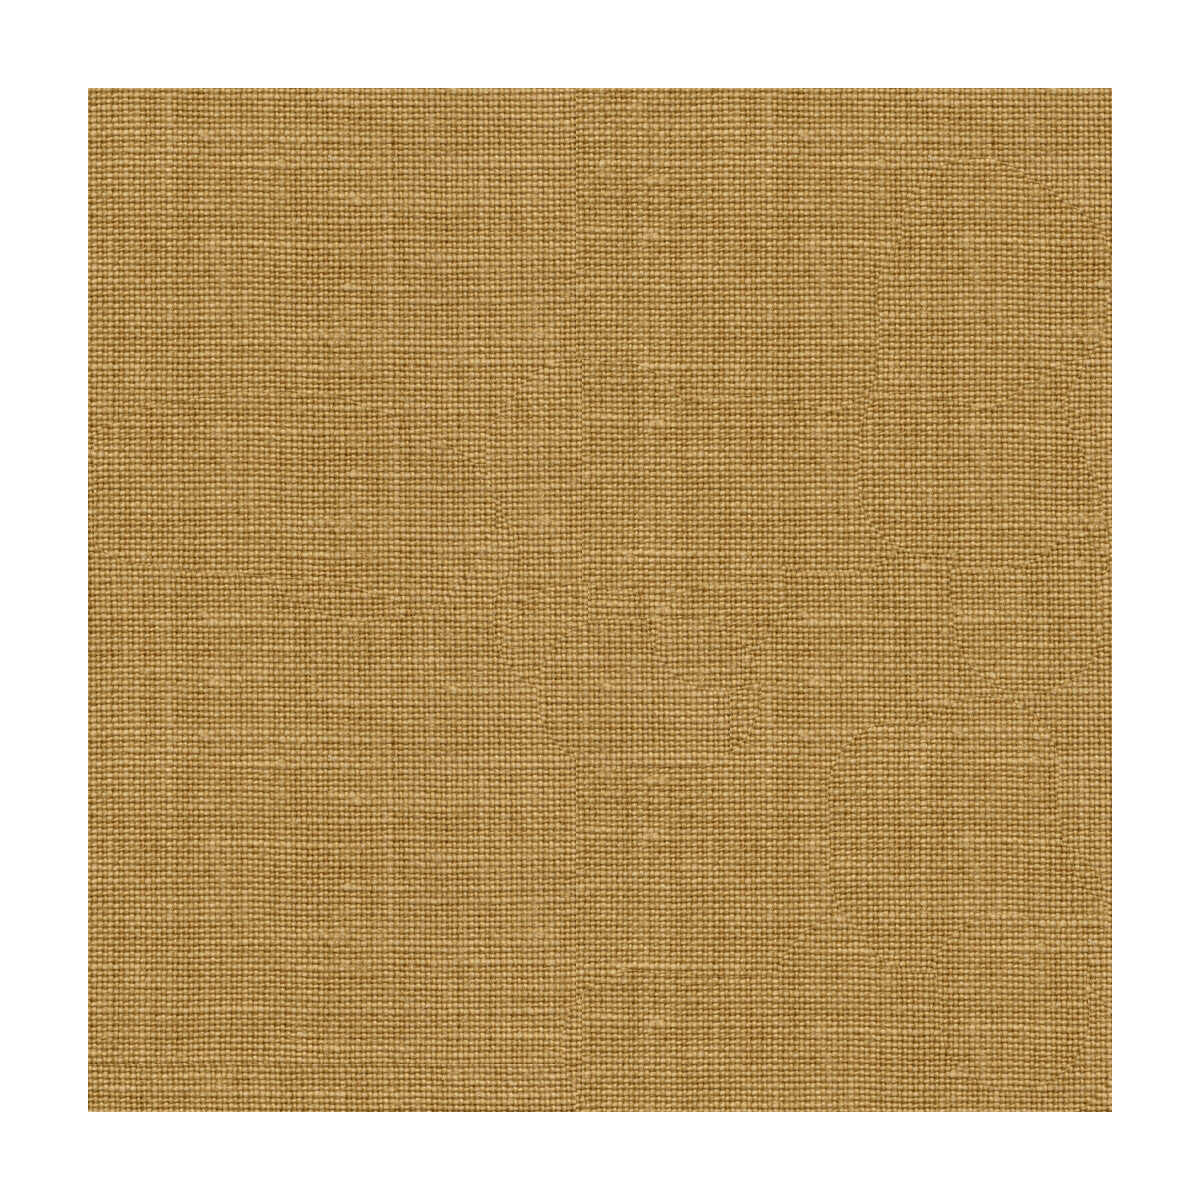 Leisure fabric in chino color - pattern 34644.106.0 - by Kravet Design in the Perfect Plains collection